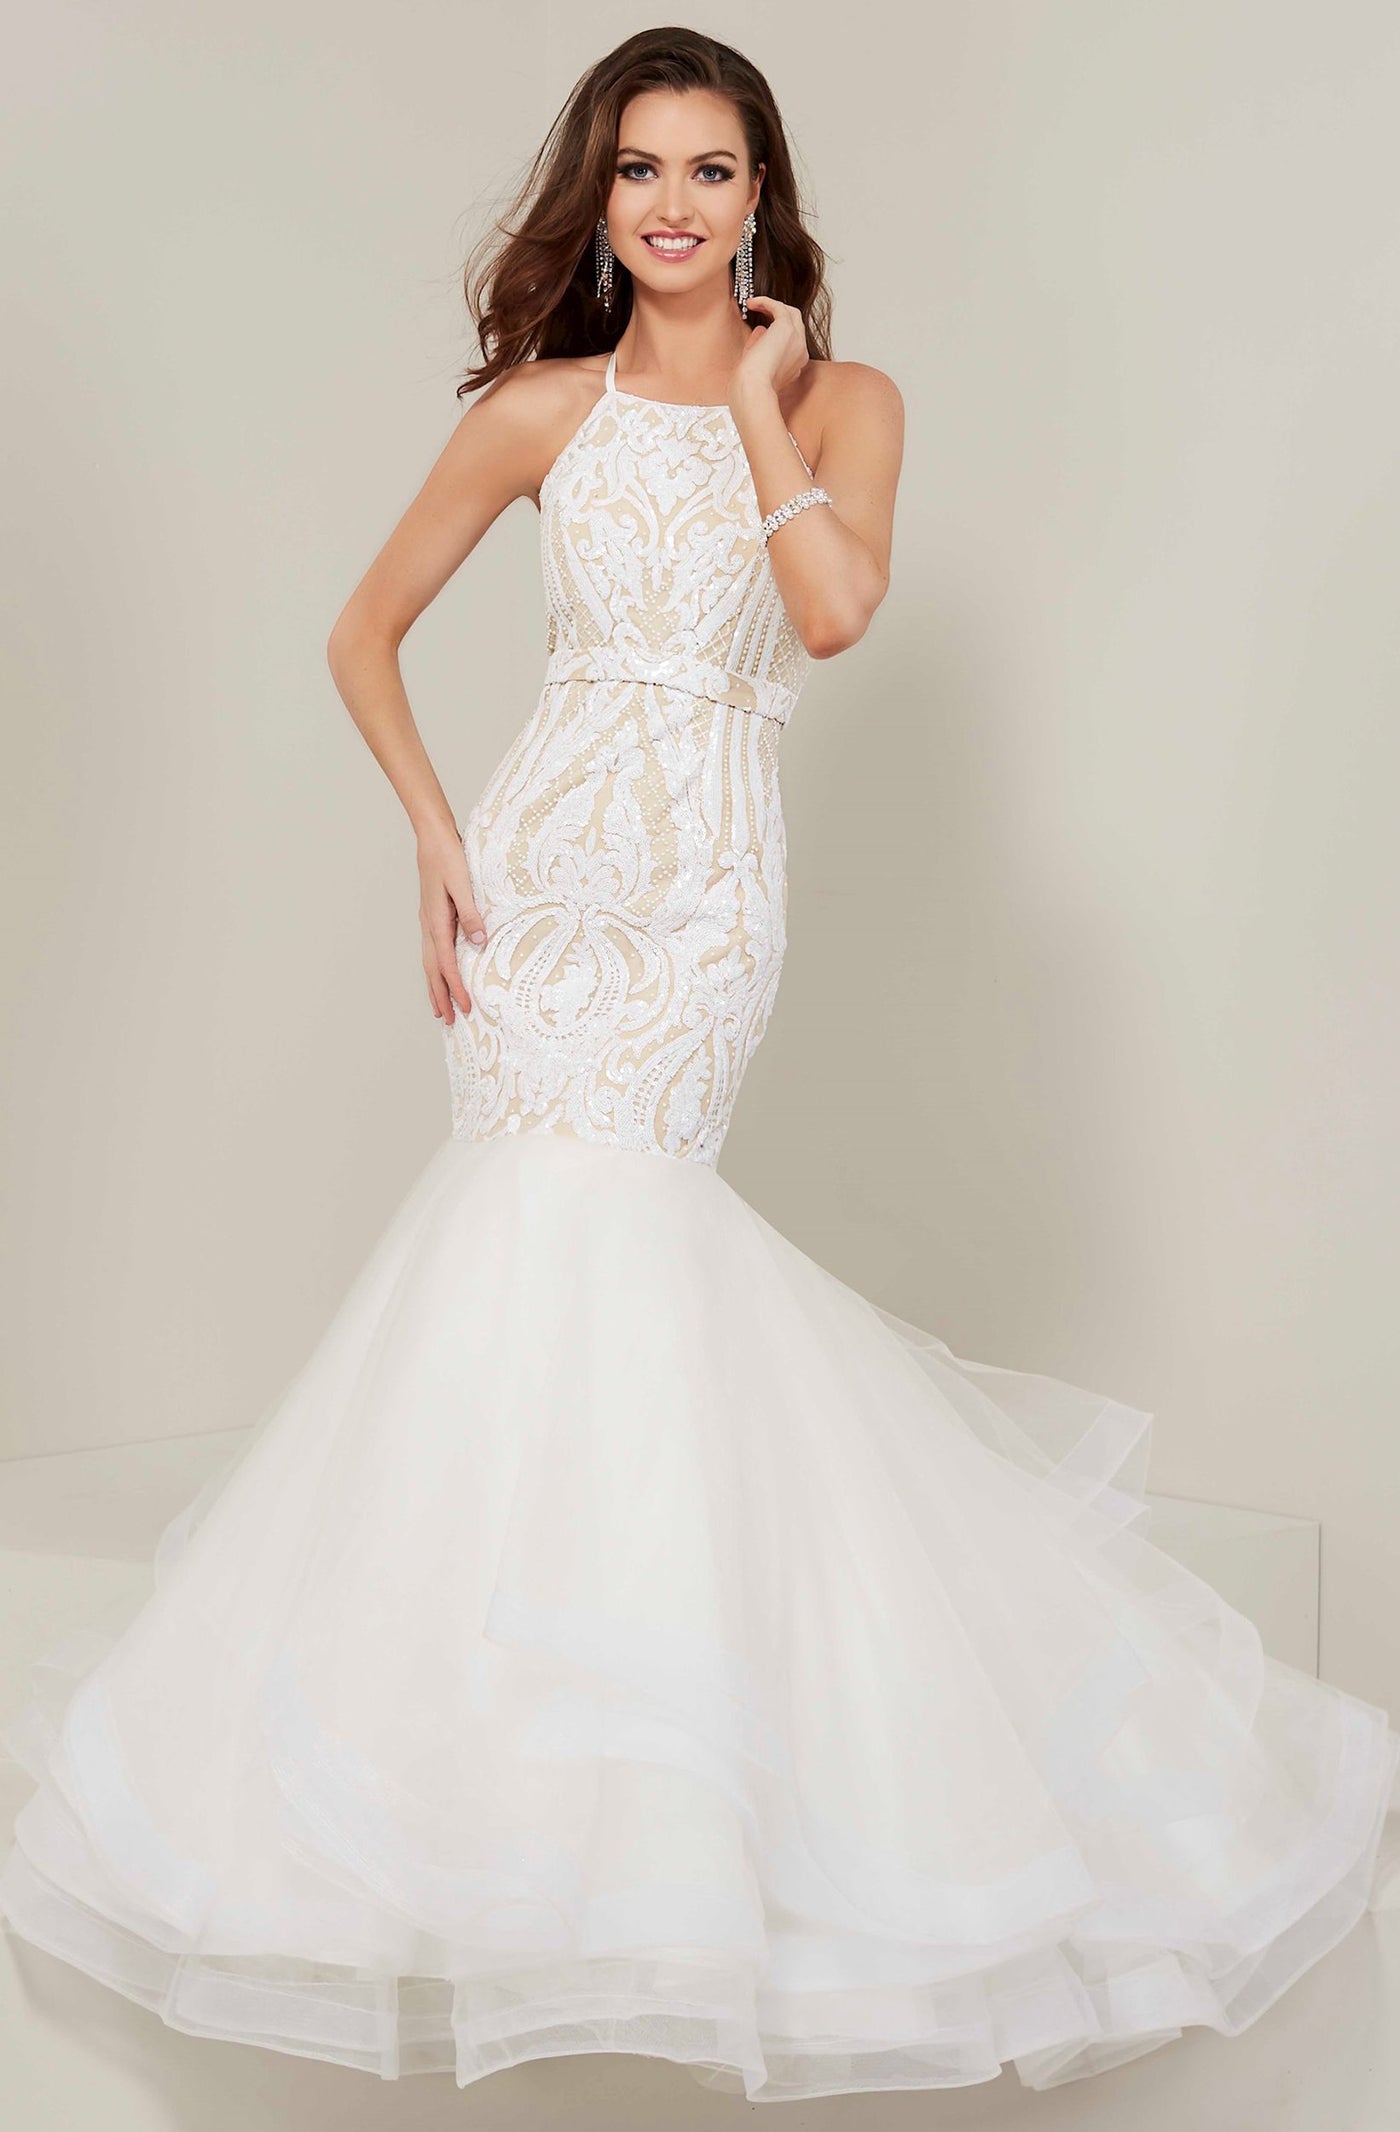 Tiffany Designs - 16359 Sequined Halter Tulle Mermaid Dress In White and Neutral